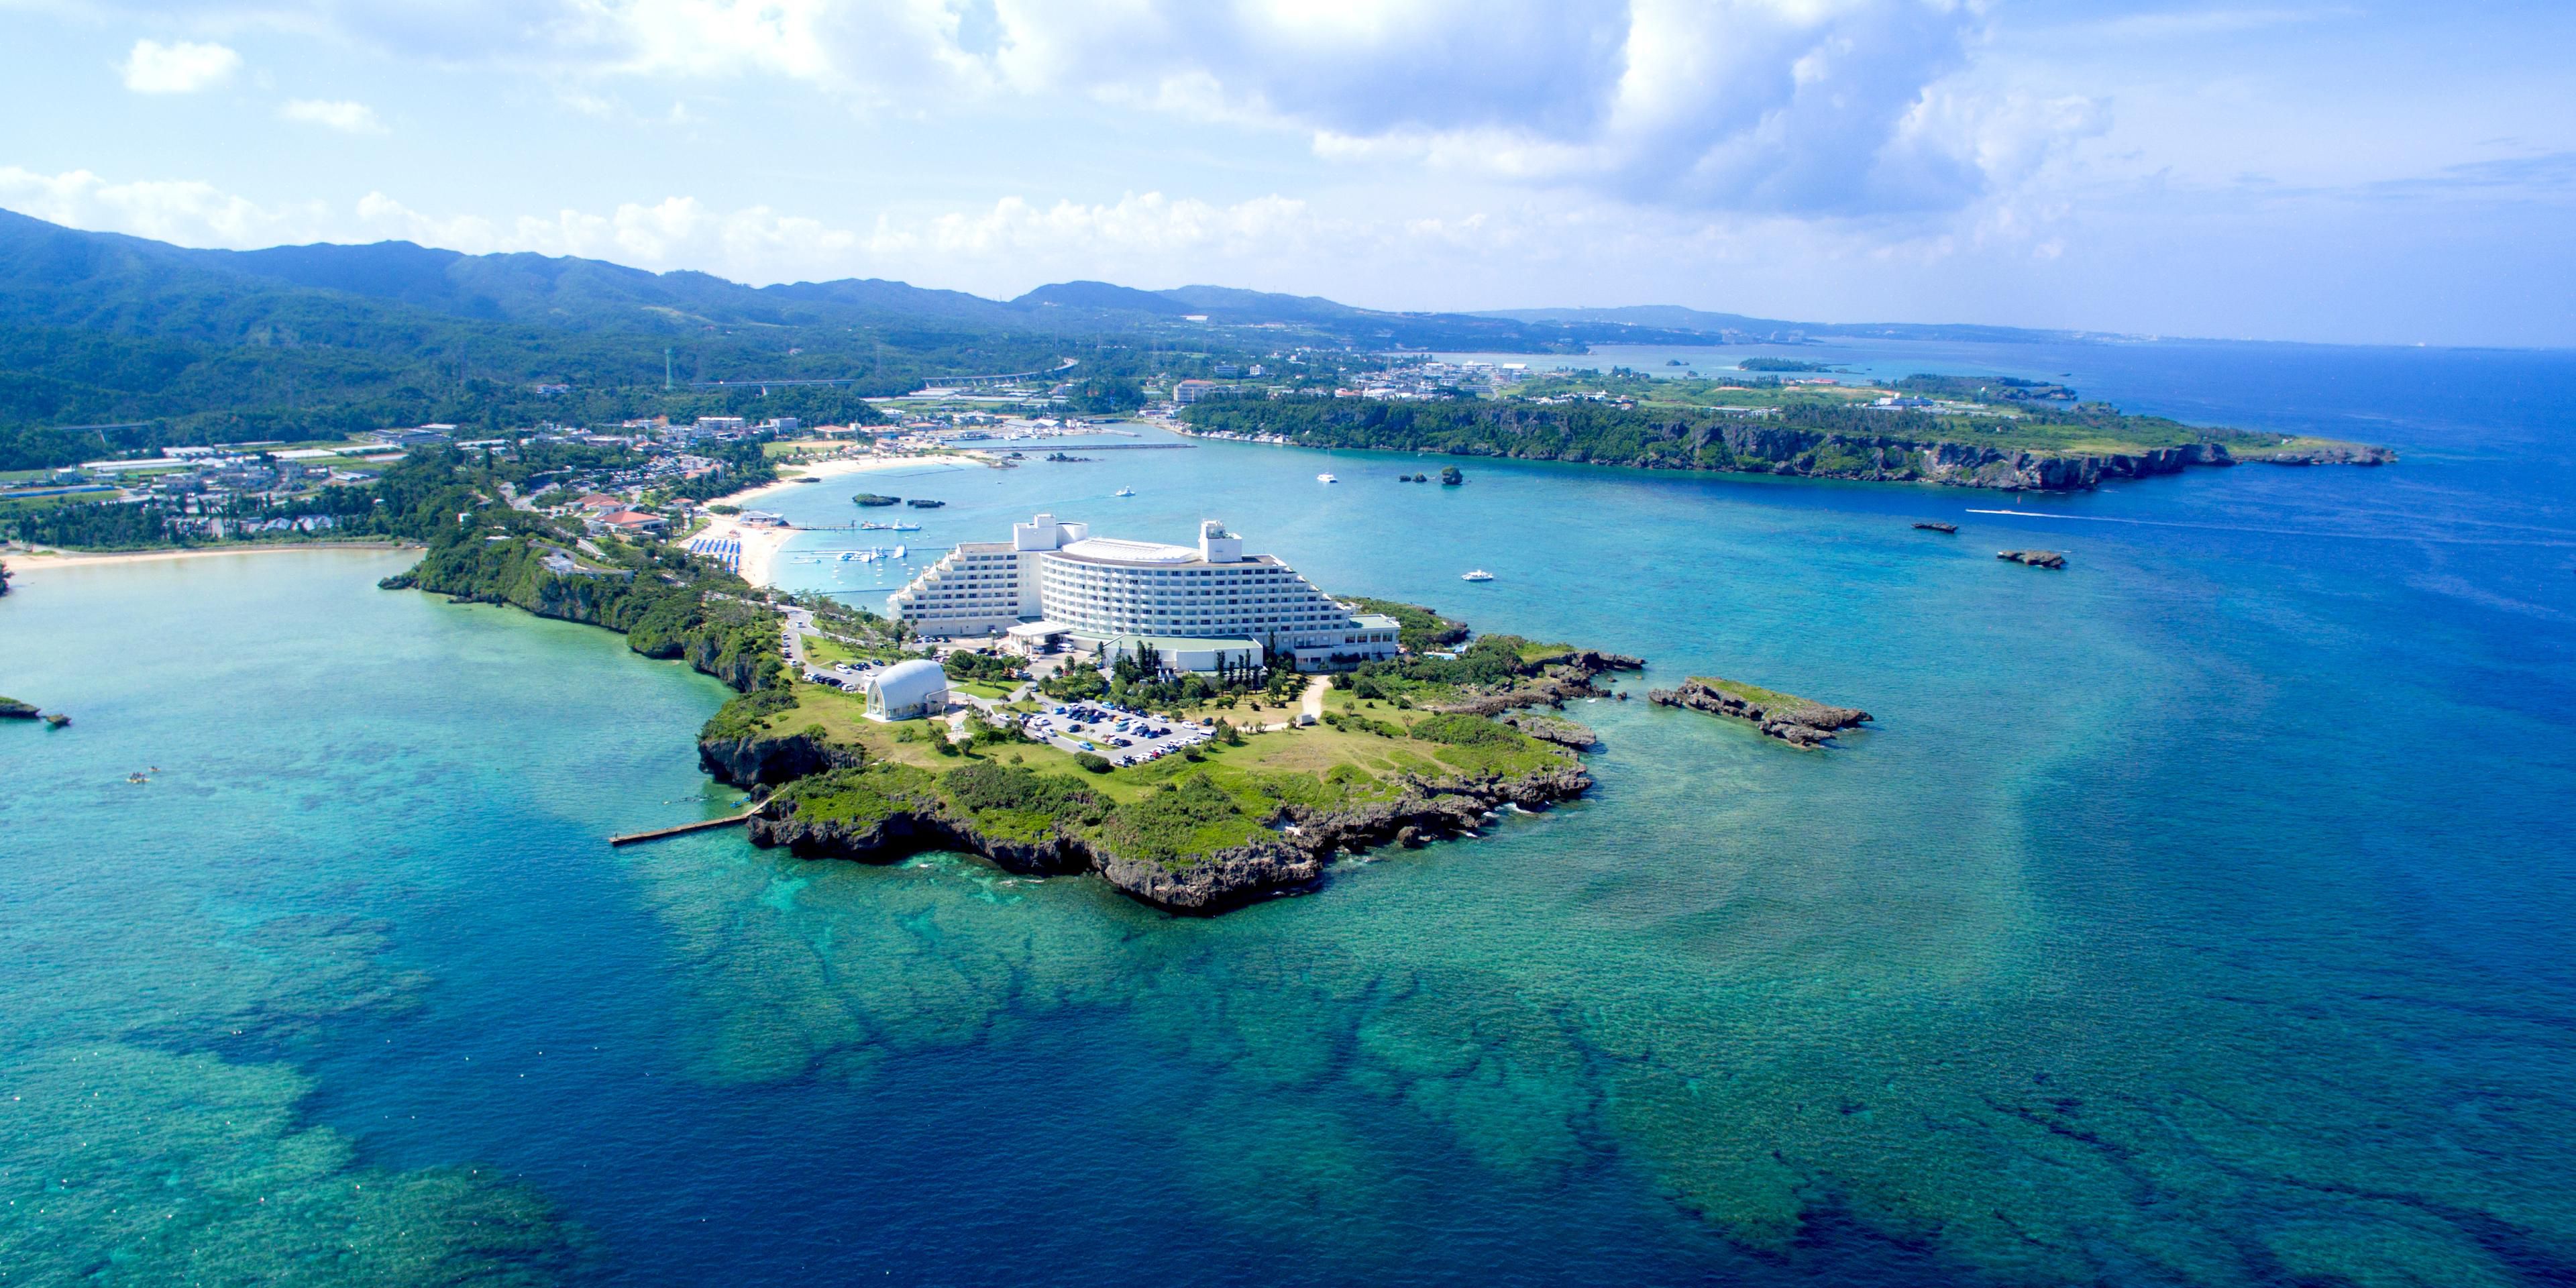 If you would like to apply for the National Travel Discount (Okinawa Aya Discovery NEXT Campaign), please click the link below and submit the application in advance.
Thank you for your kind support.